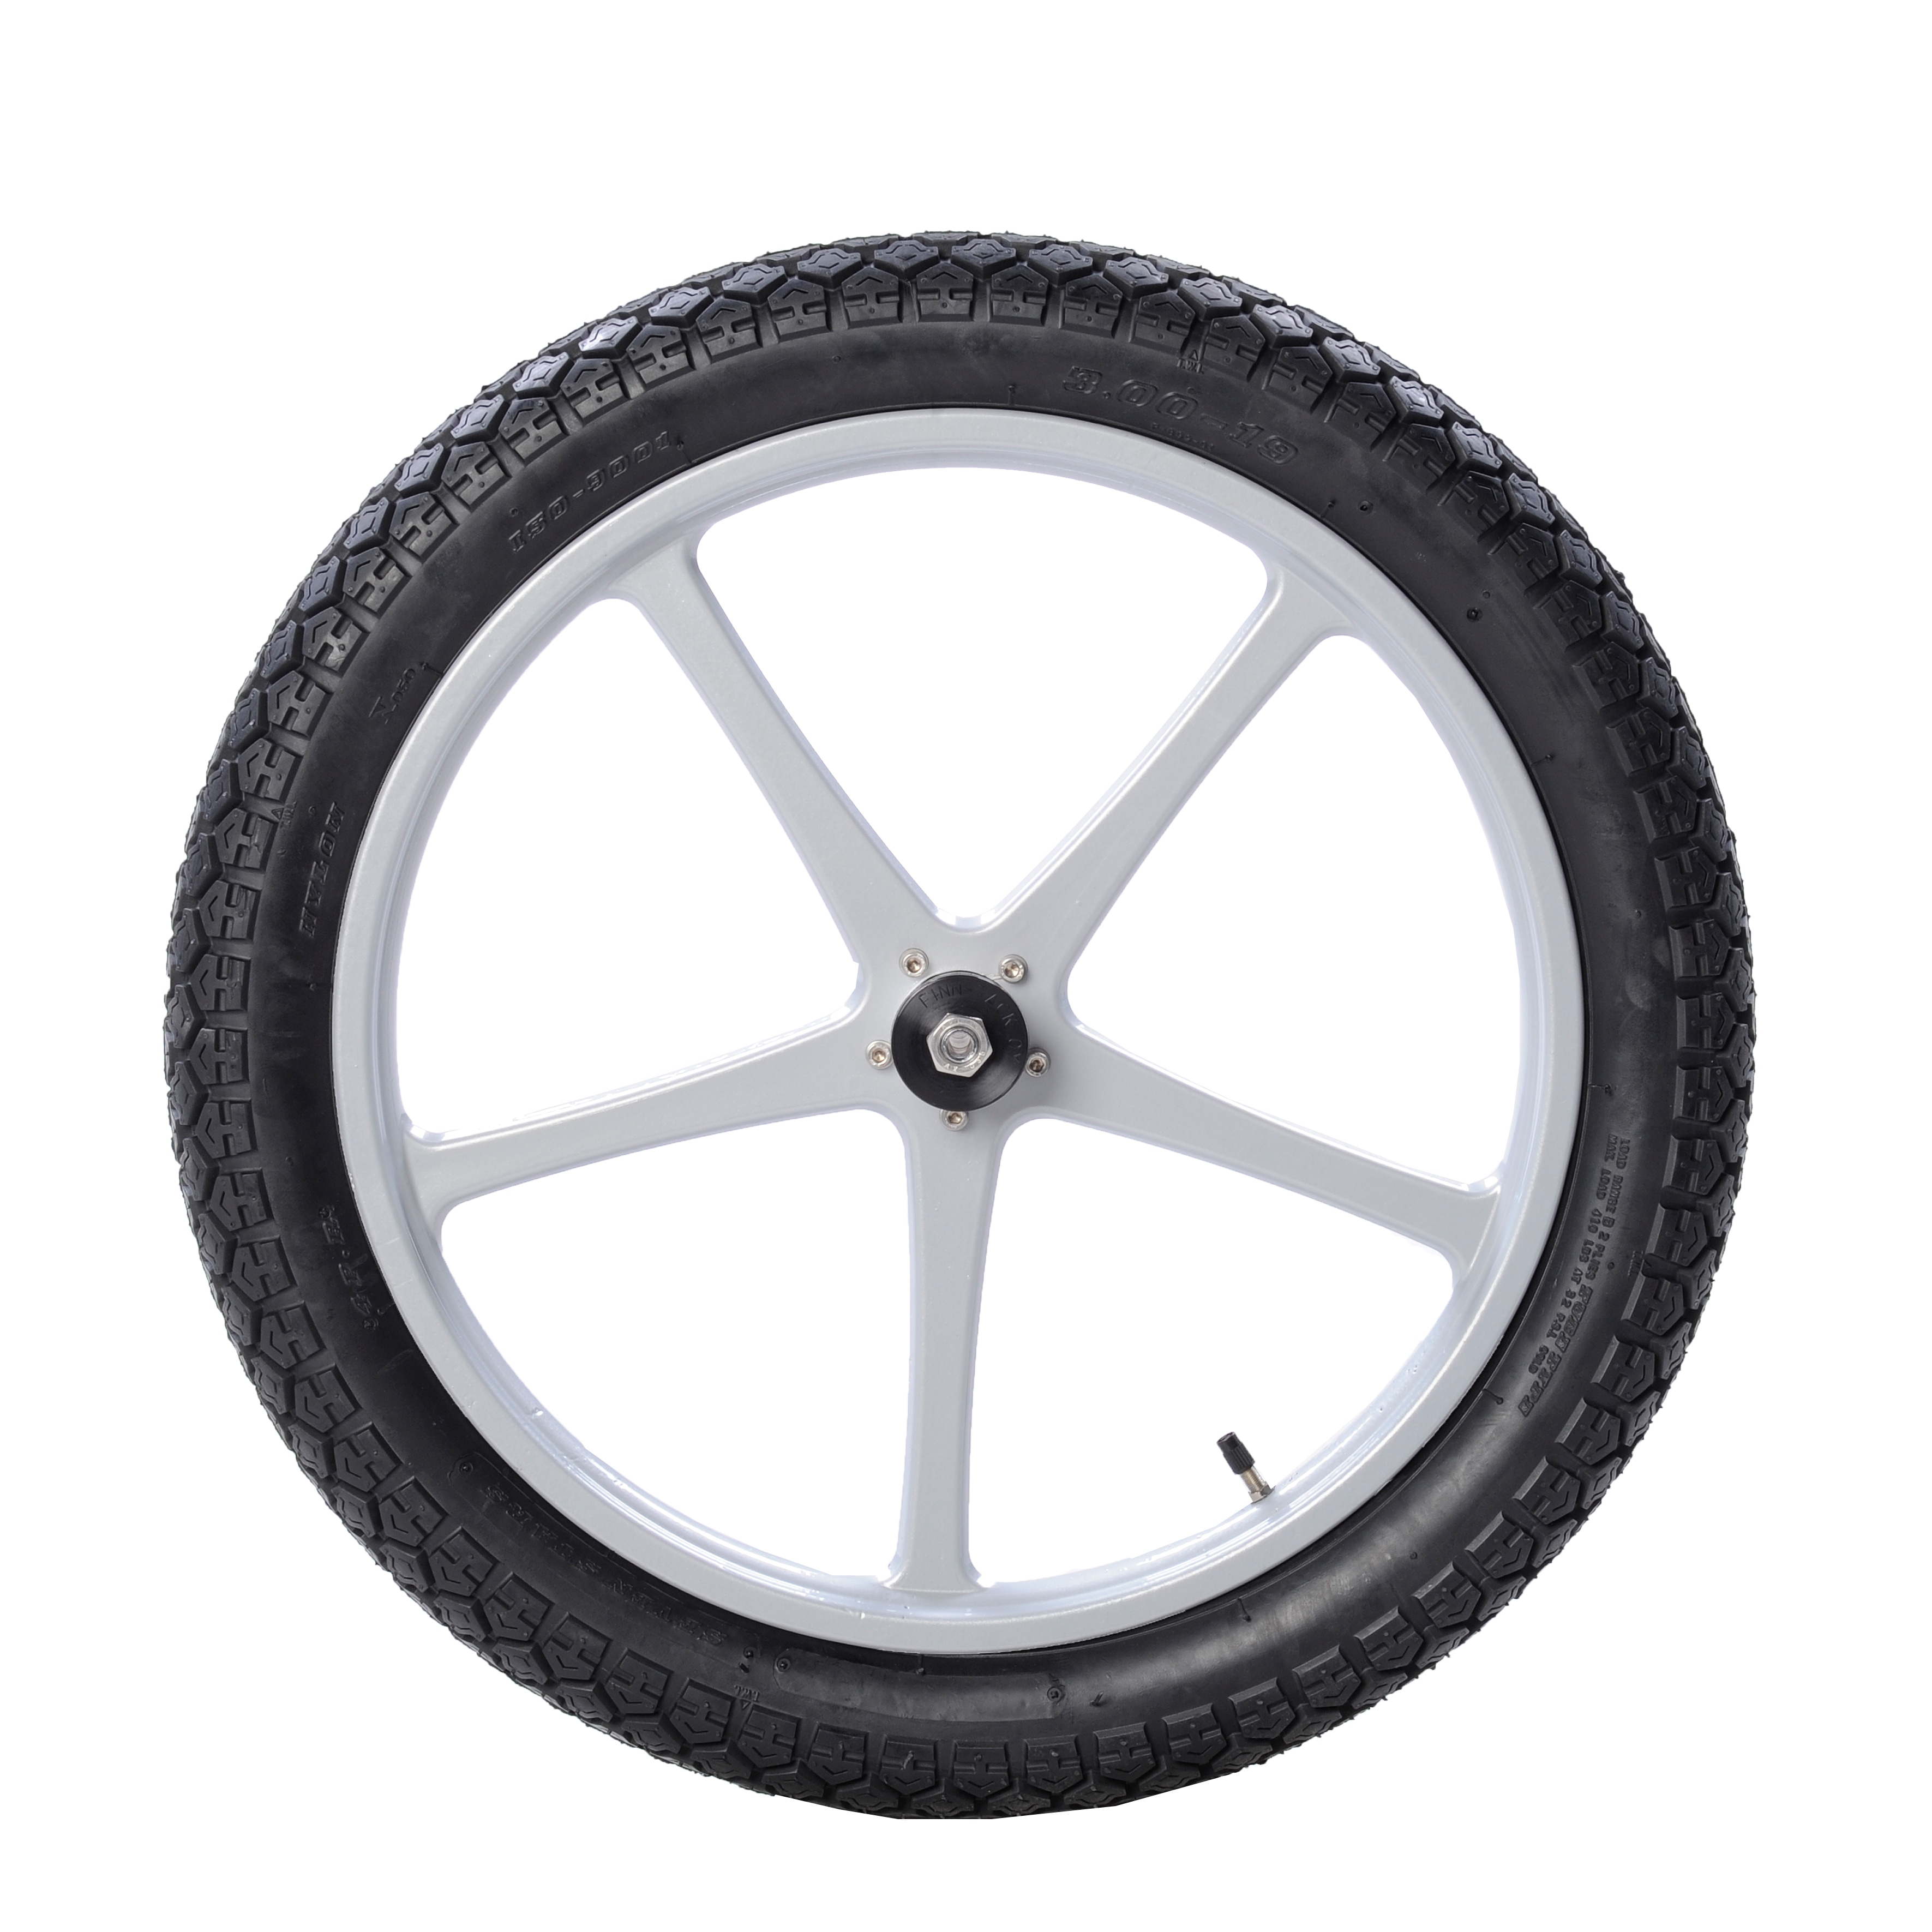 Finntack 19"x 3.00 training cart wheel (sold in pairs)